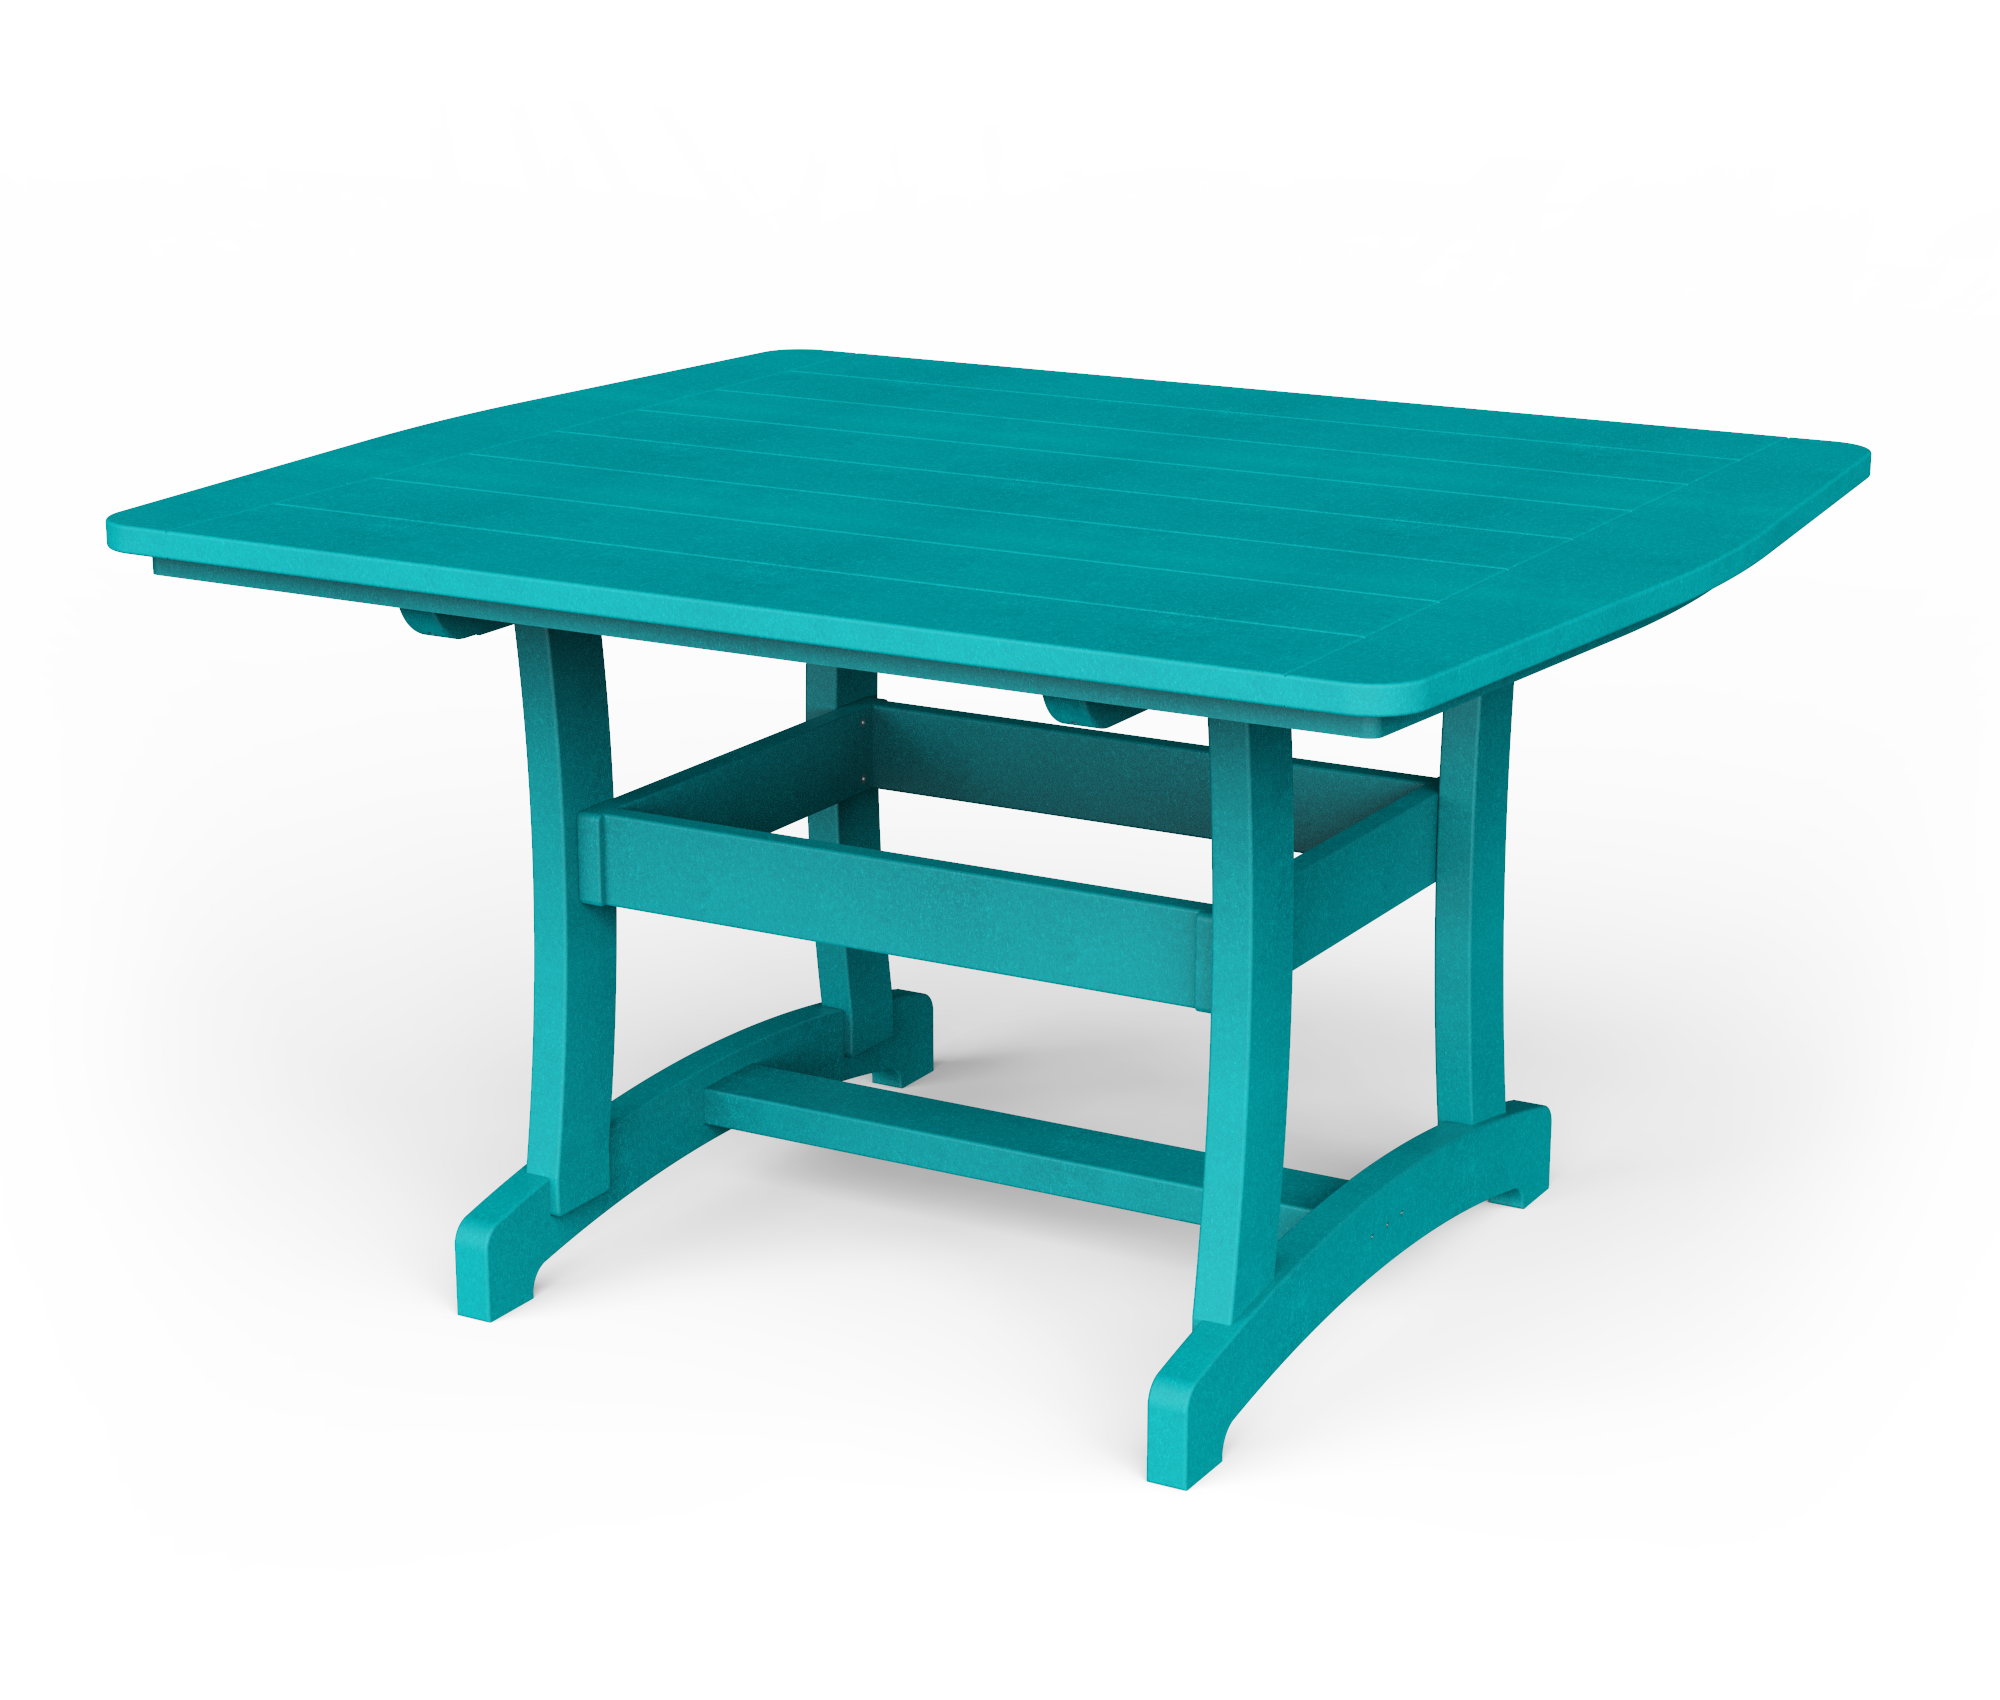 Poly dining table.